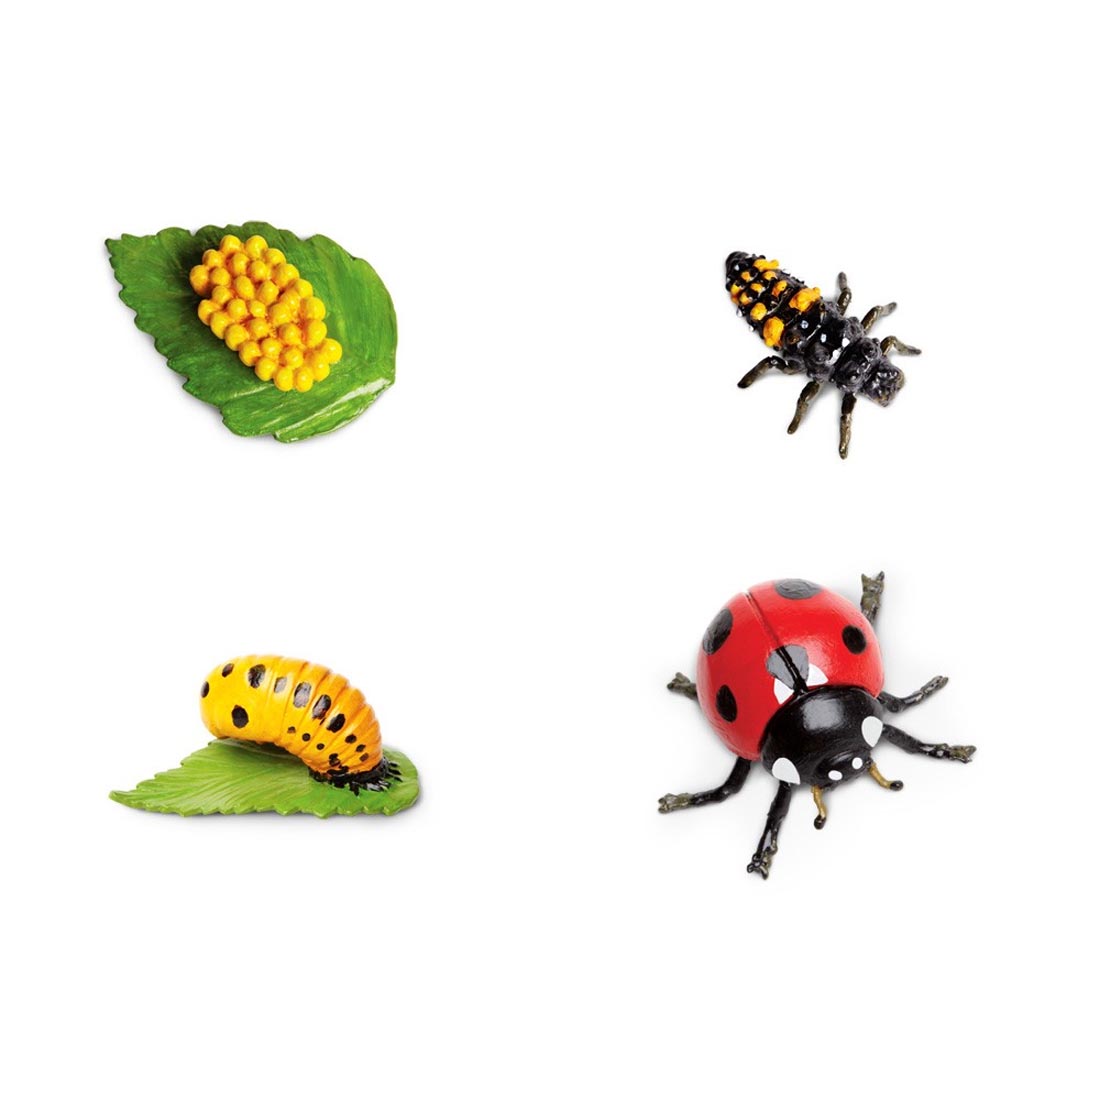 Four figurines to show the Life Cycle of a Ladybug